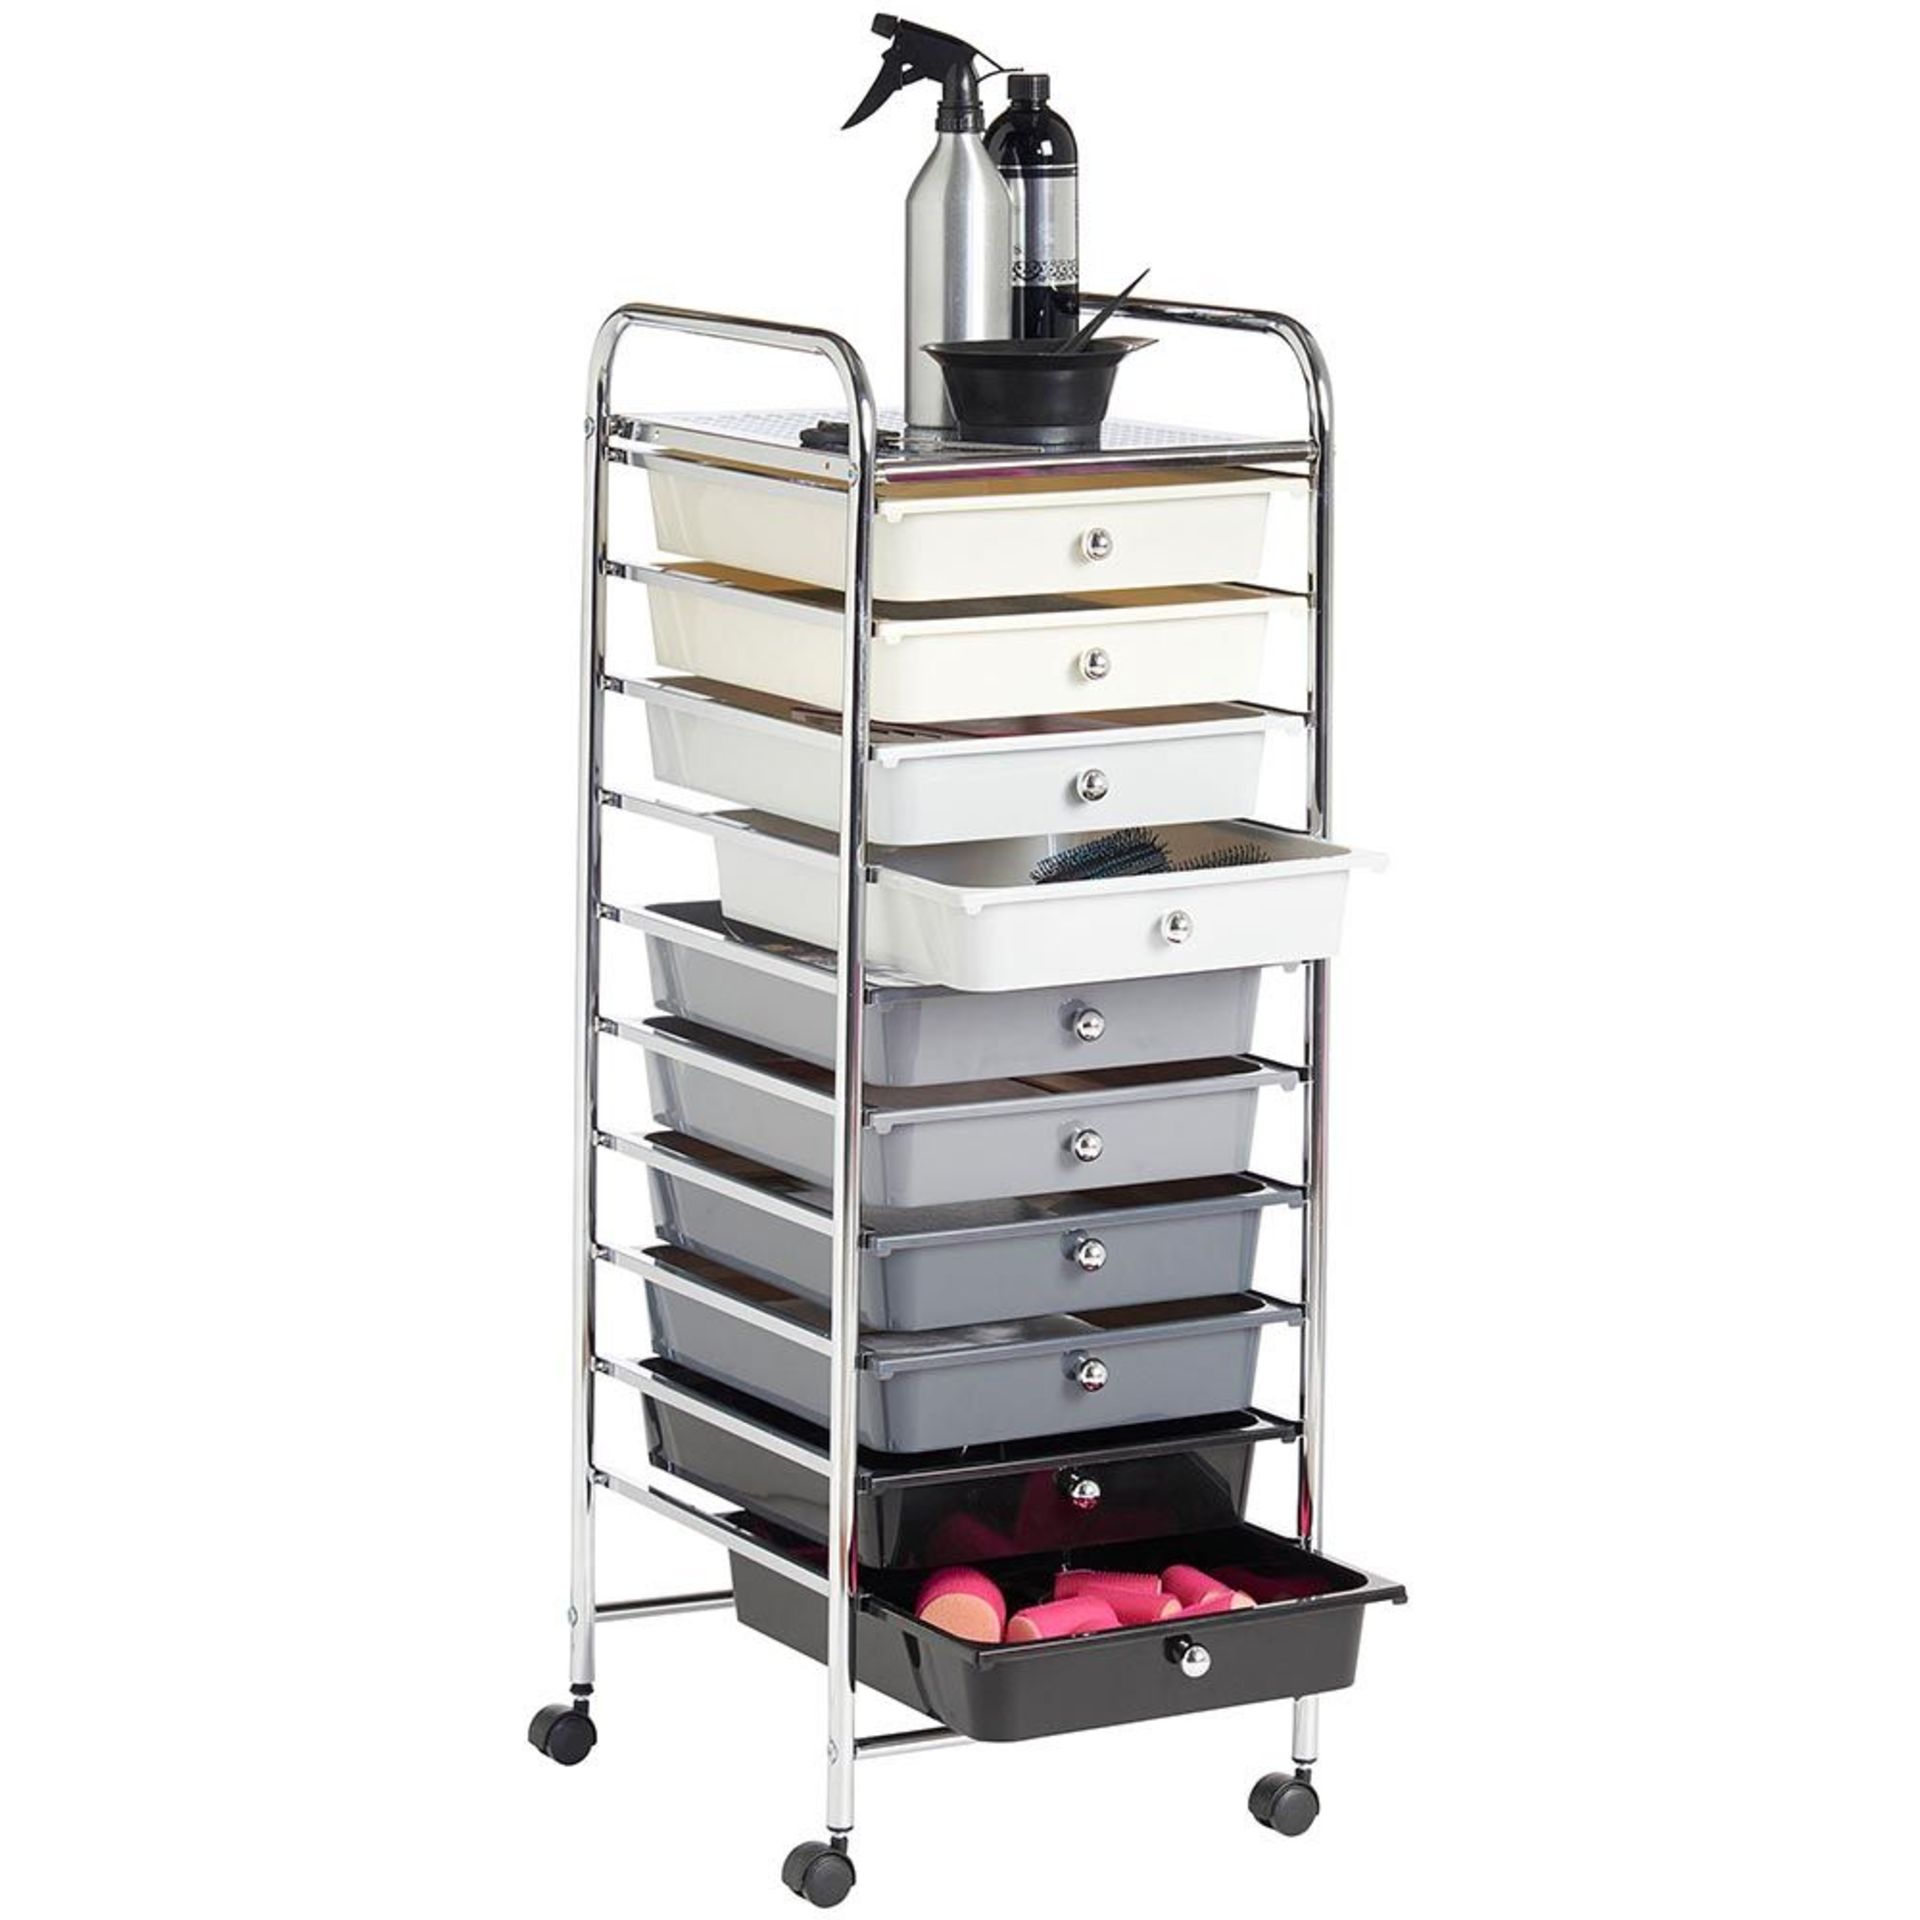 (KG16) Ombre 10 Drawer Trolley. Great for homes, offices, beauty salons and more! Each drawer ... - Image 3 of 4